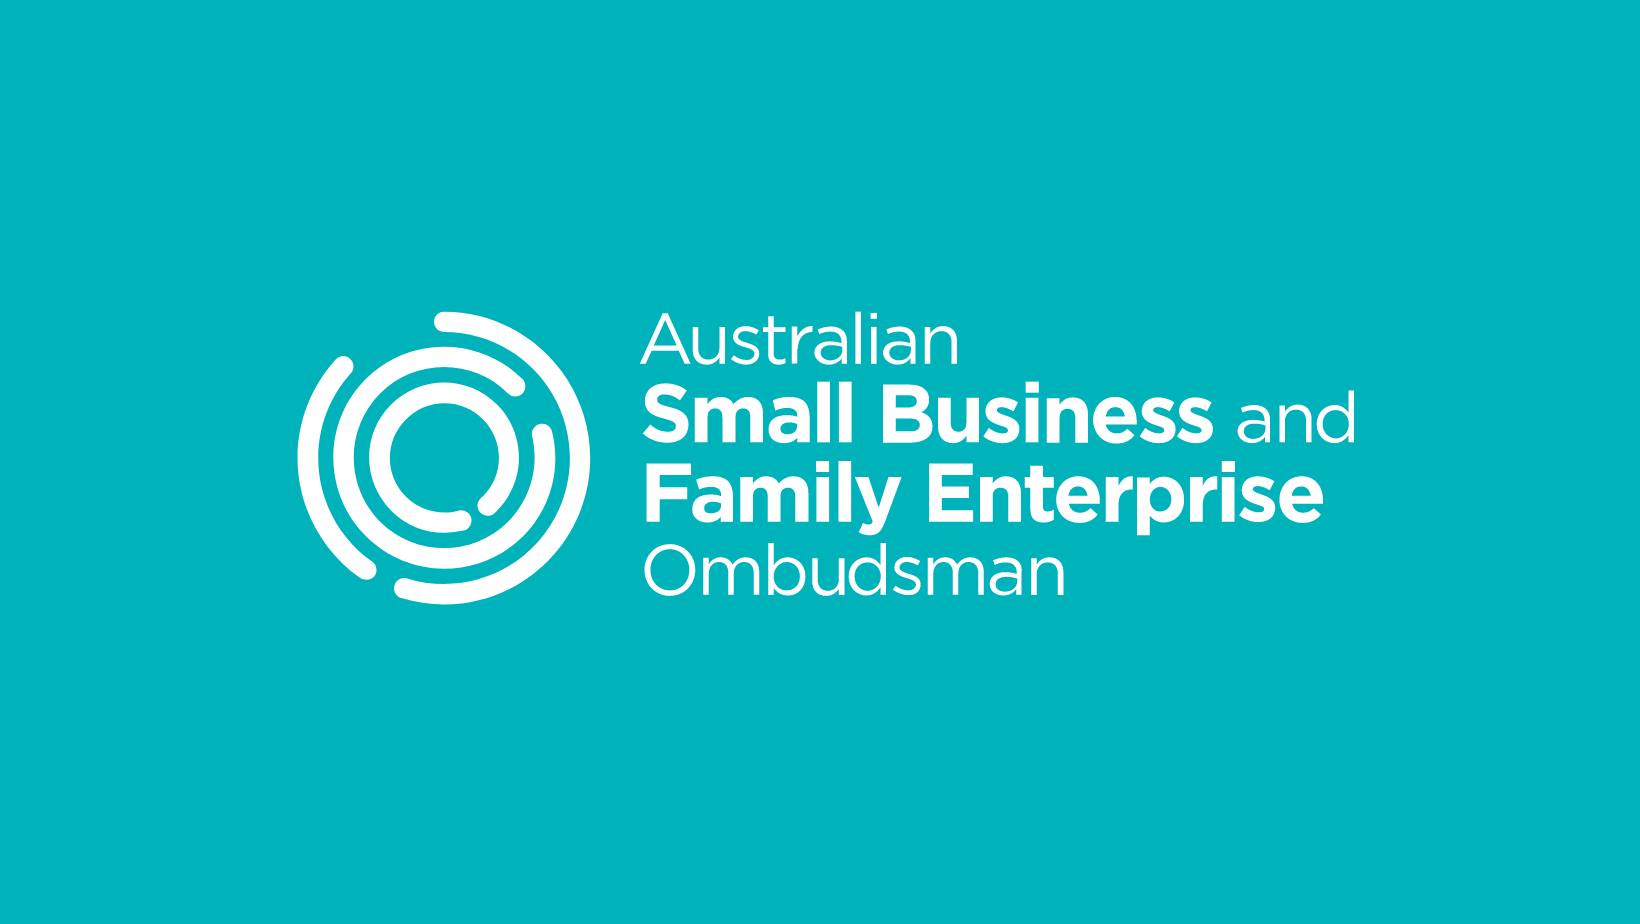 NANA meets with Australian Small Business and Family Enterprise Ombudsman